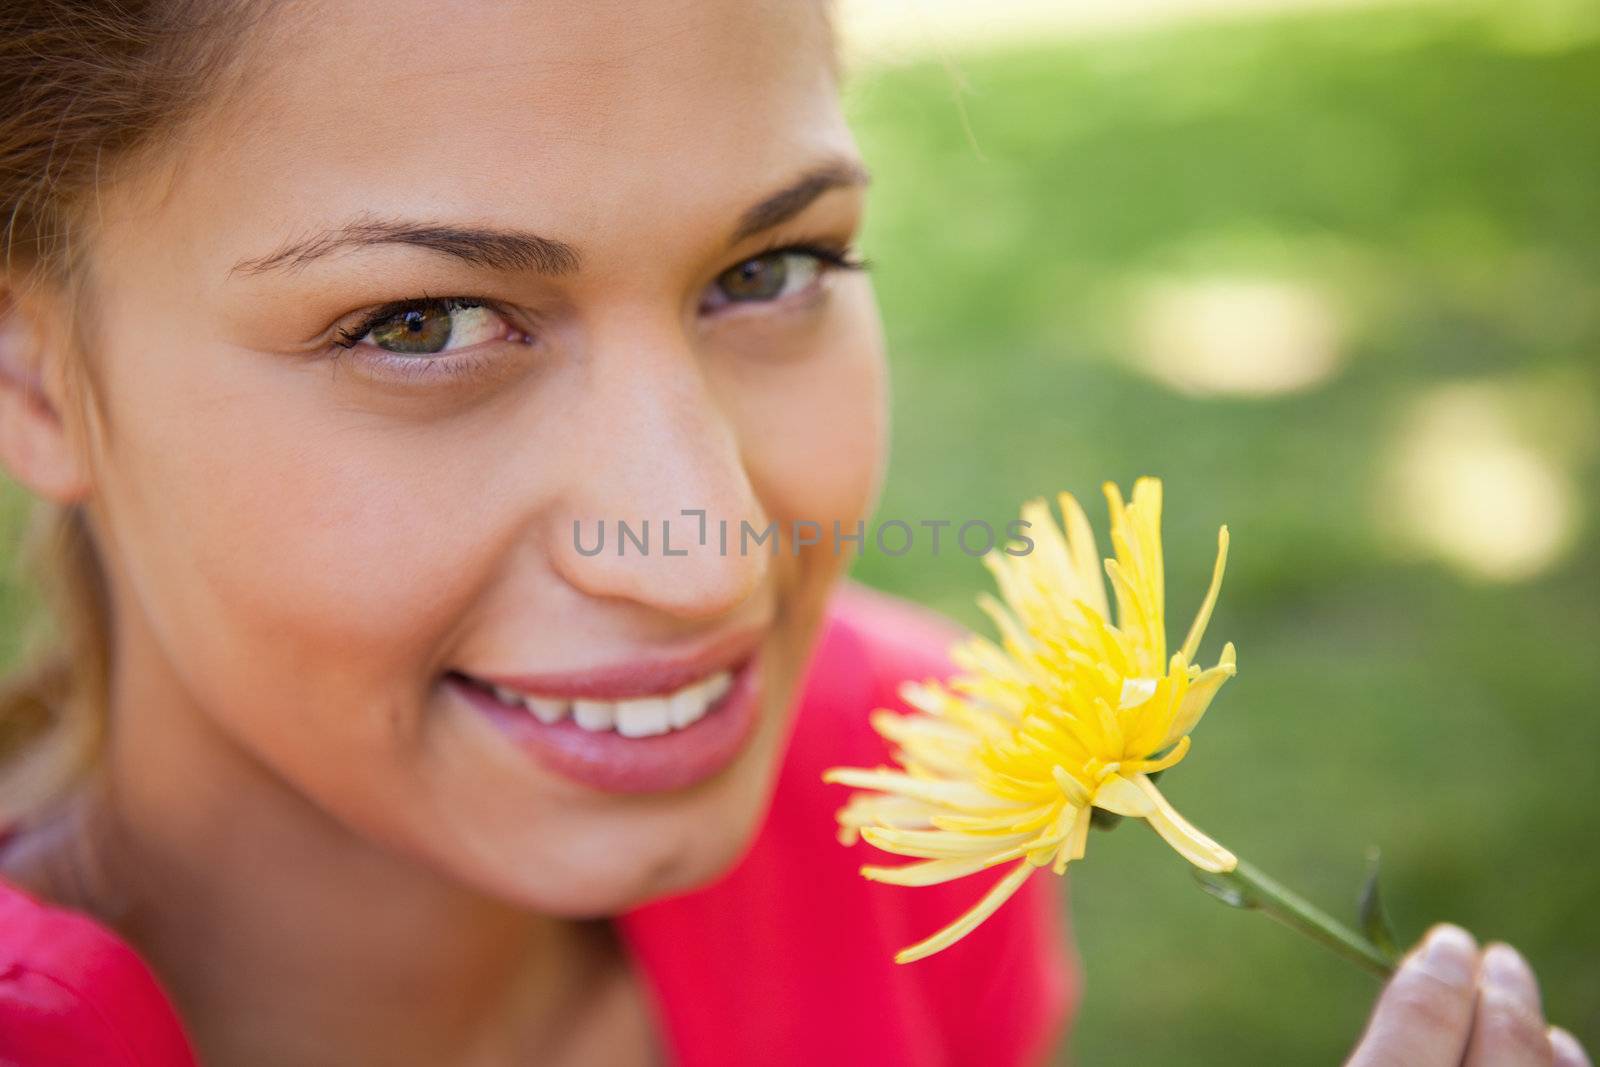 Woman smiling as she looks upwards while holding a yellow flower by Wavebreakmedia